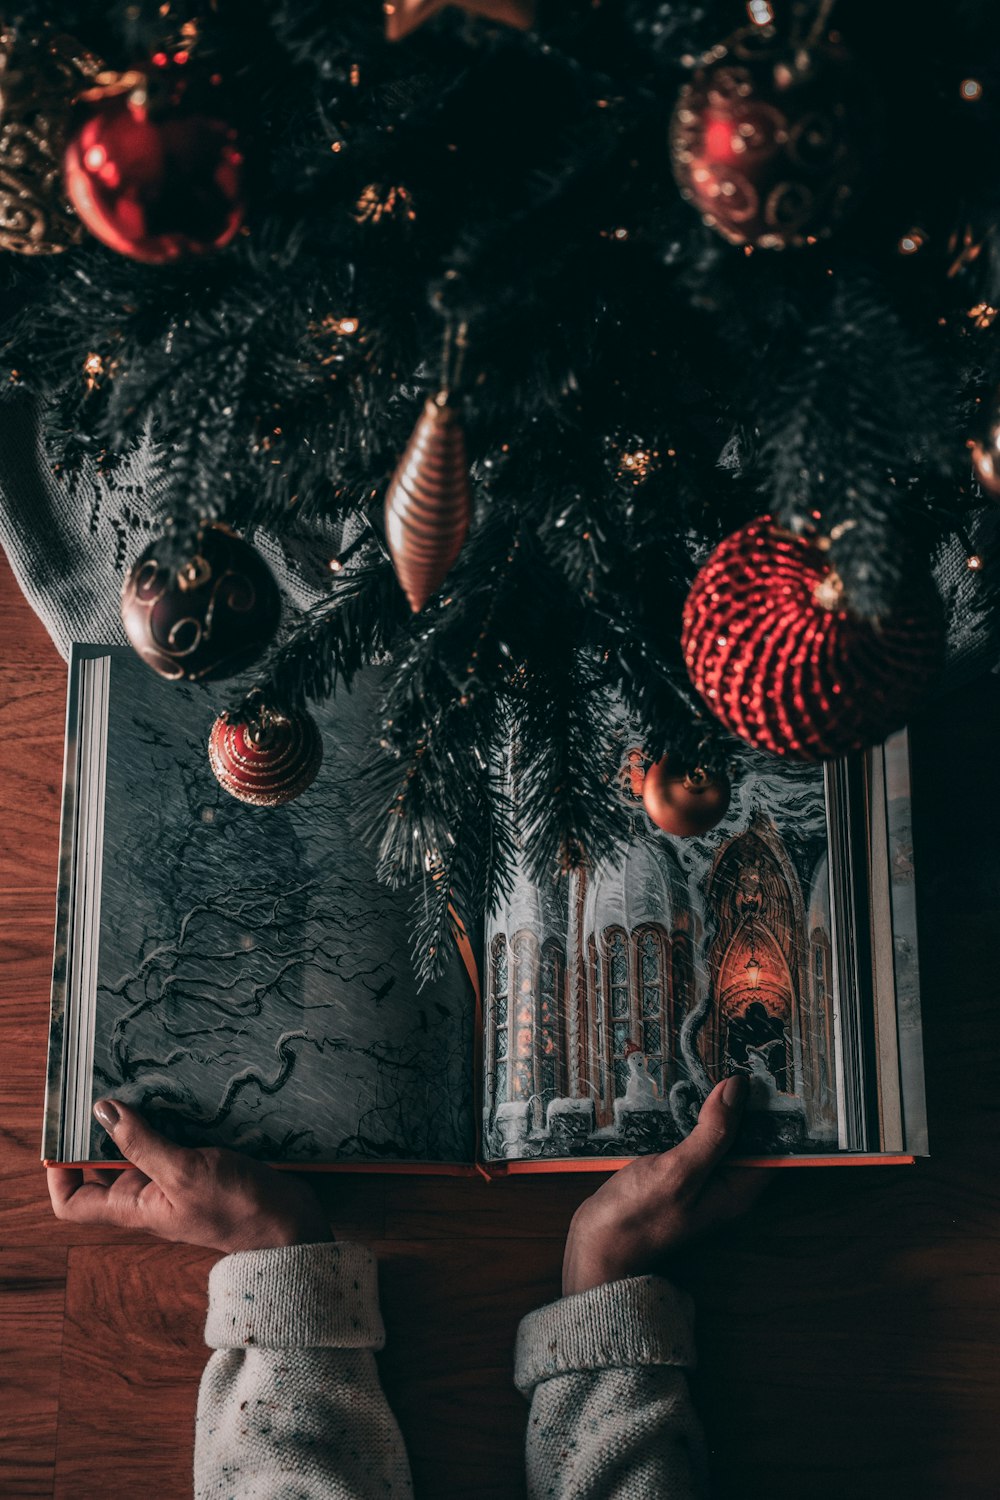 a person holding a book in front of a christmas tree